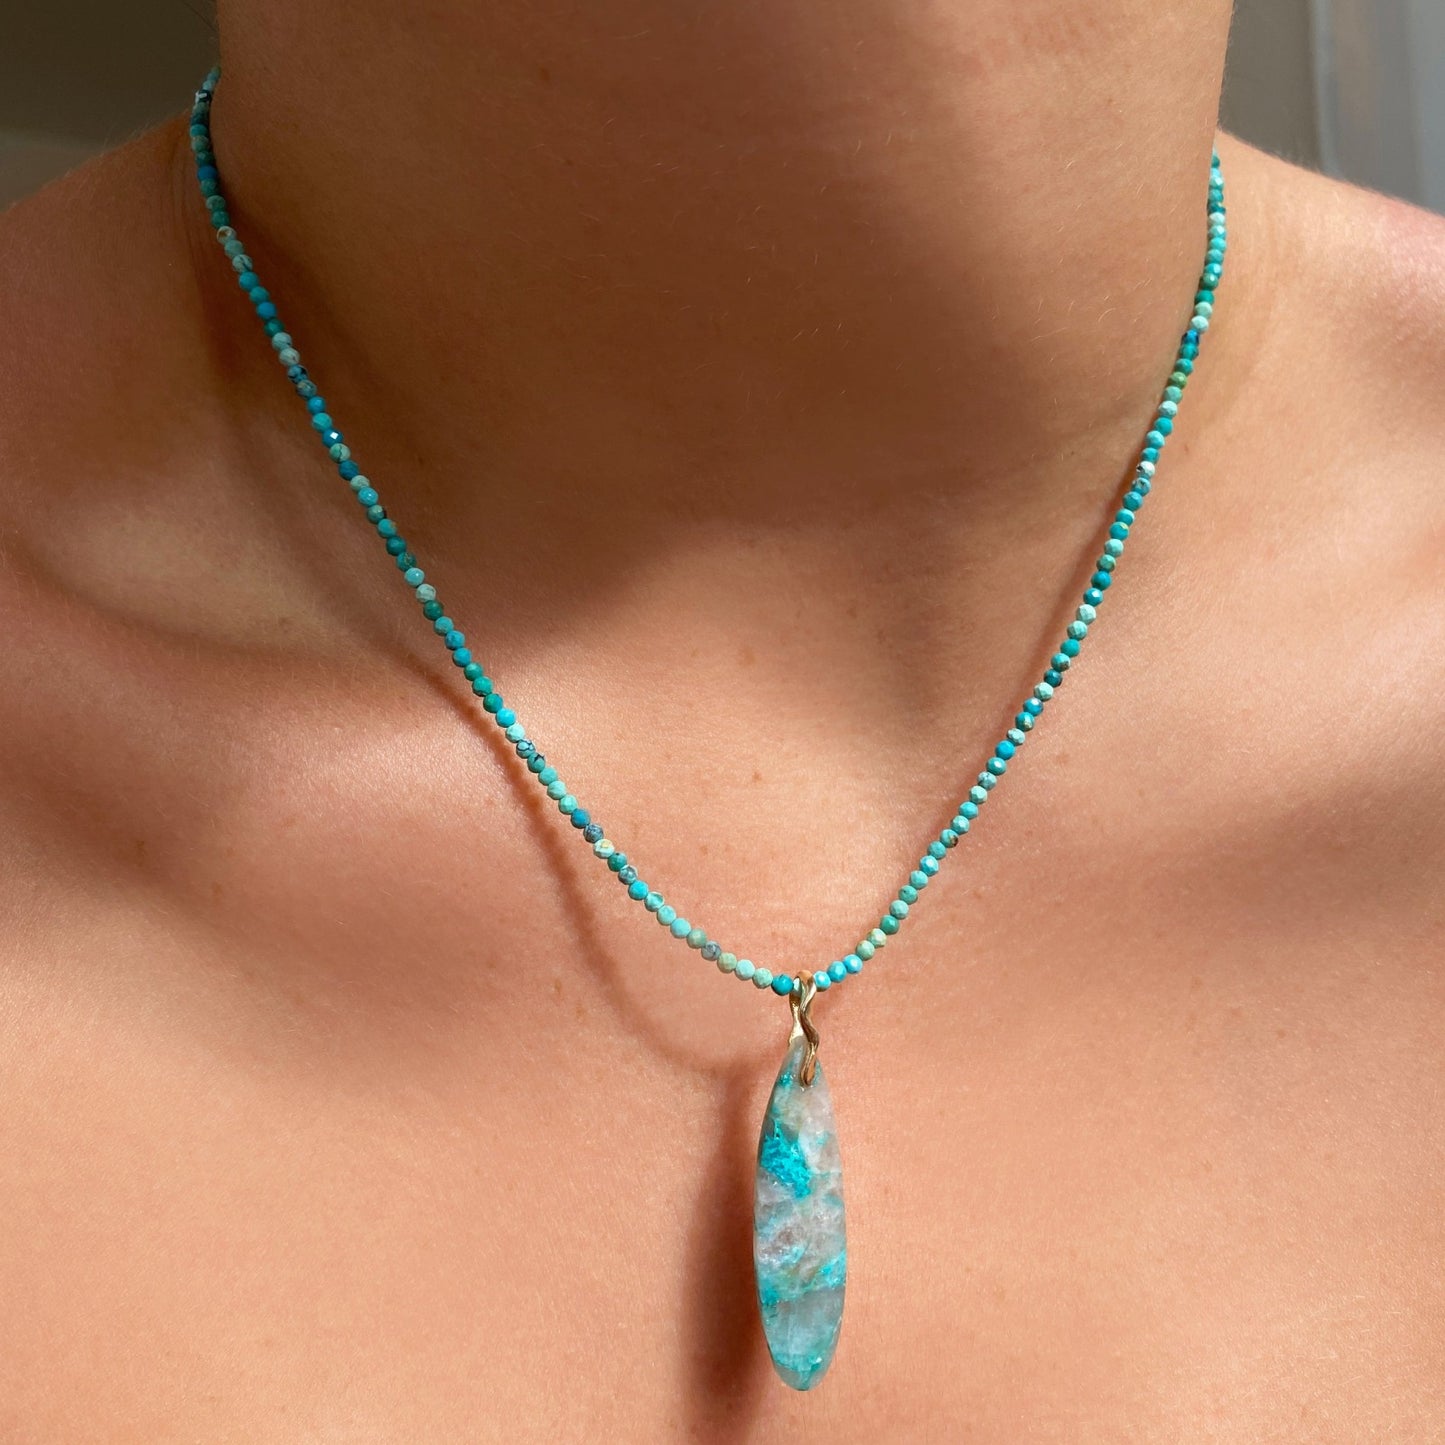 Chrysocolla in Quartz Surfboard Charm. Styled on a neck hanging from a beaded necklace.